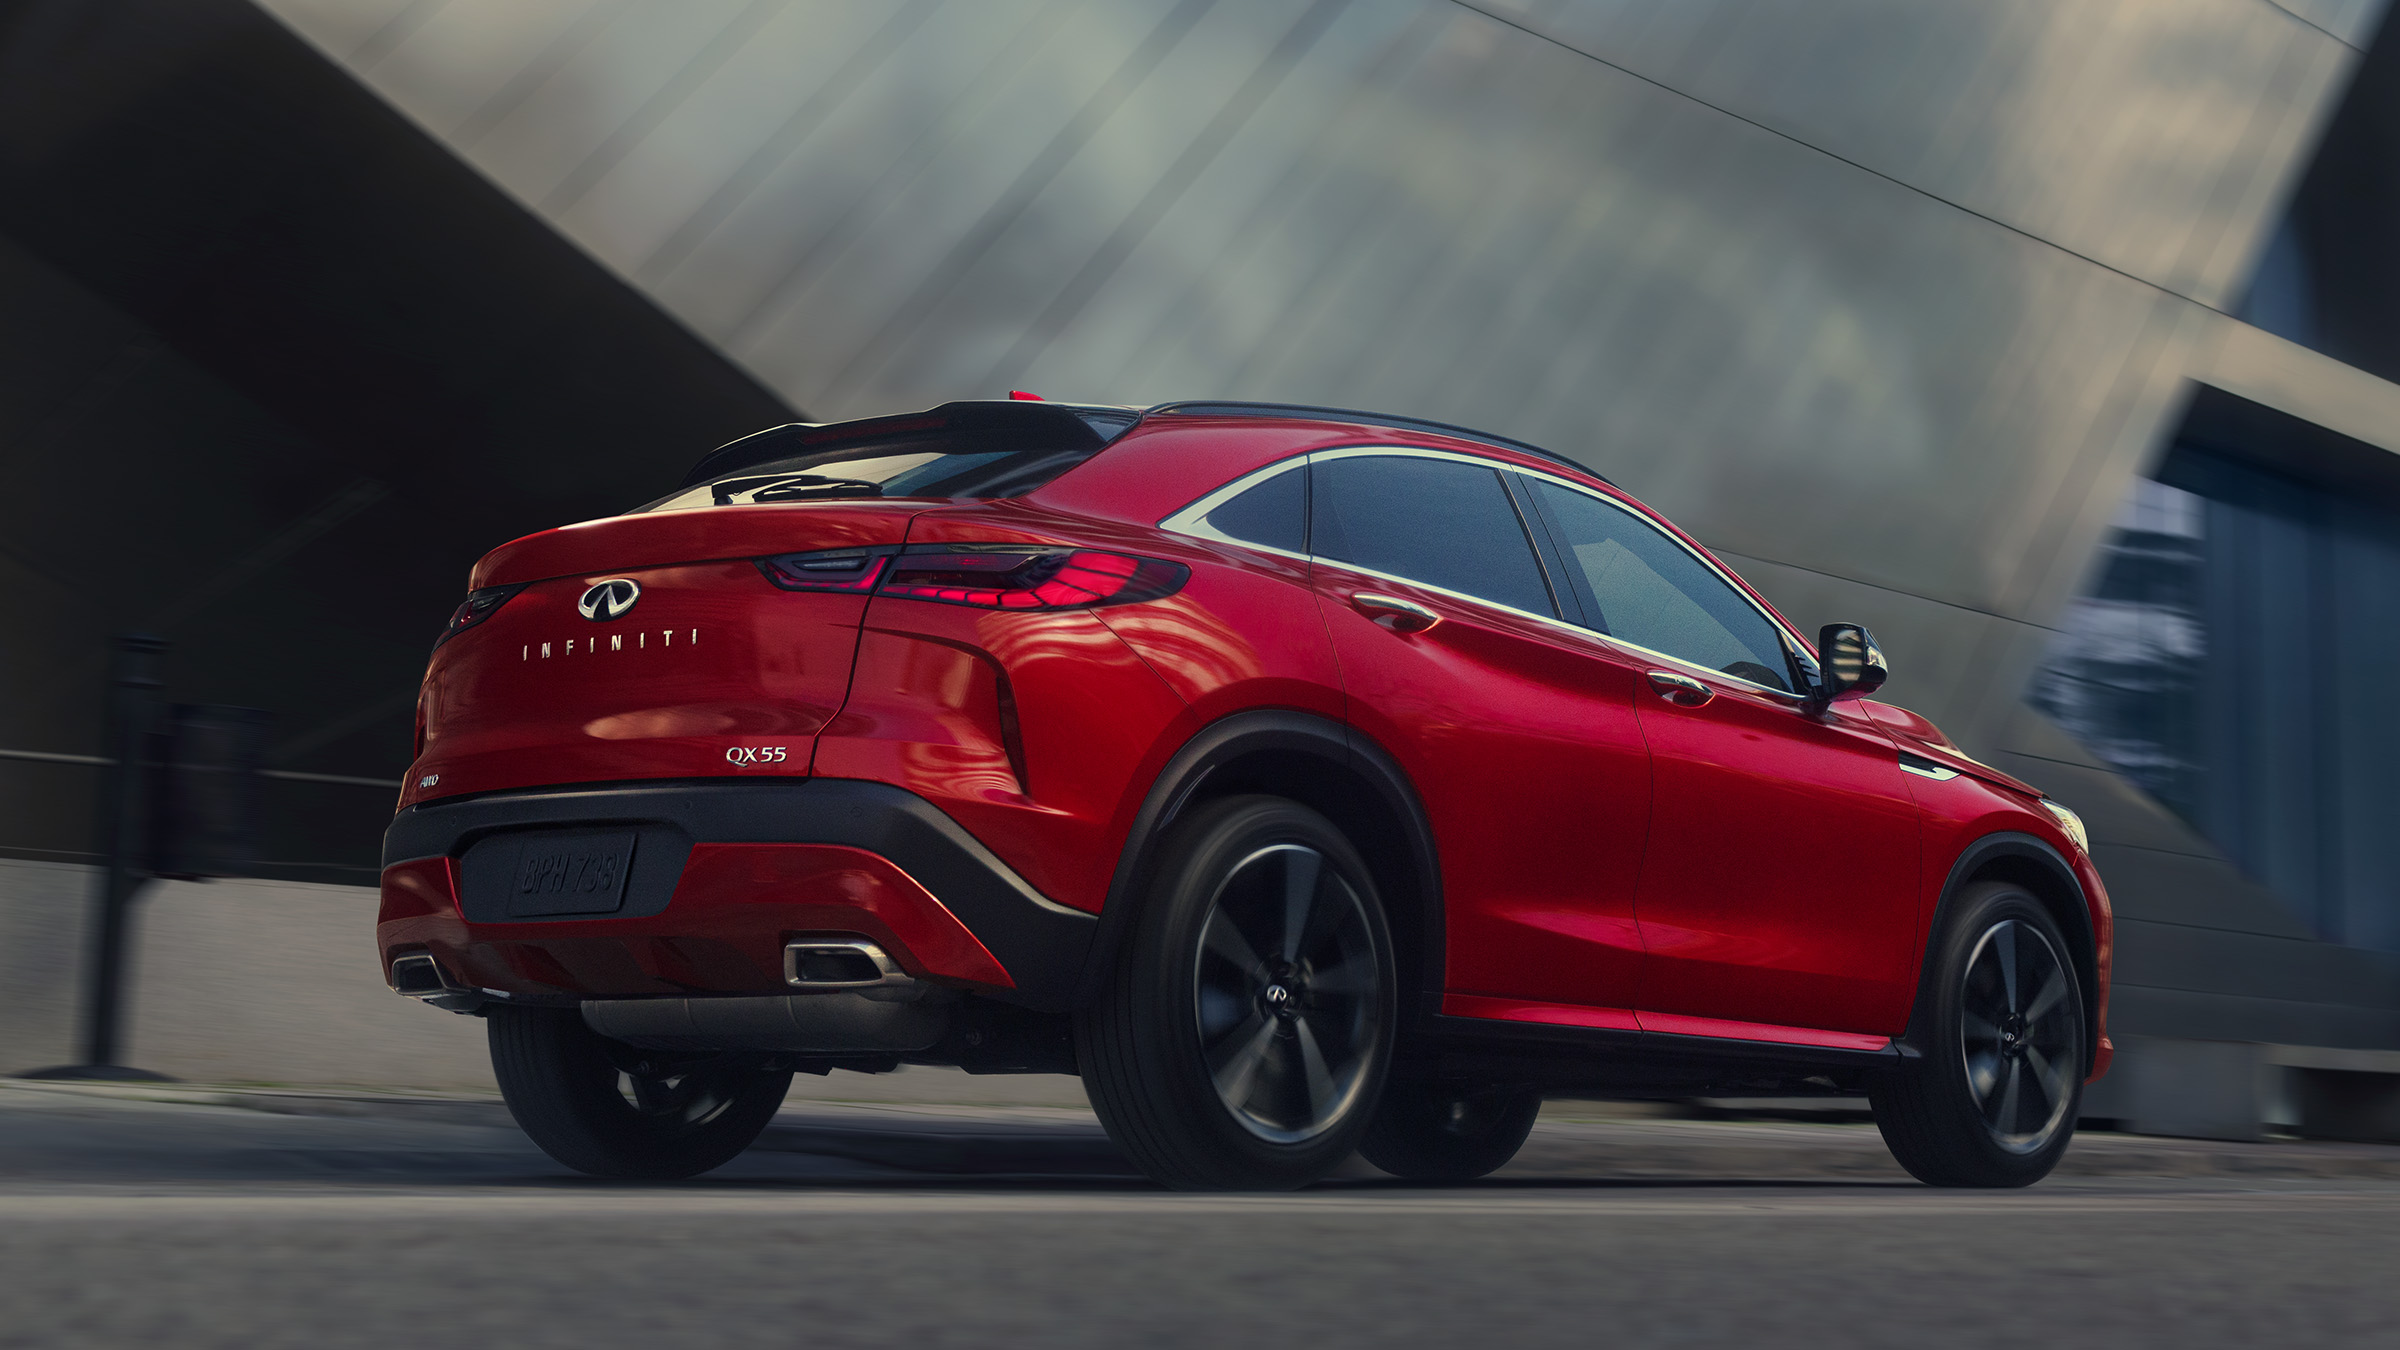 2022 INFINITI QX55 crossover coupe in red full body.